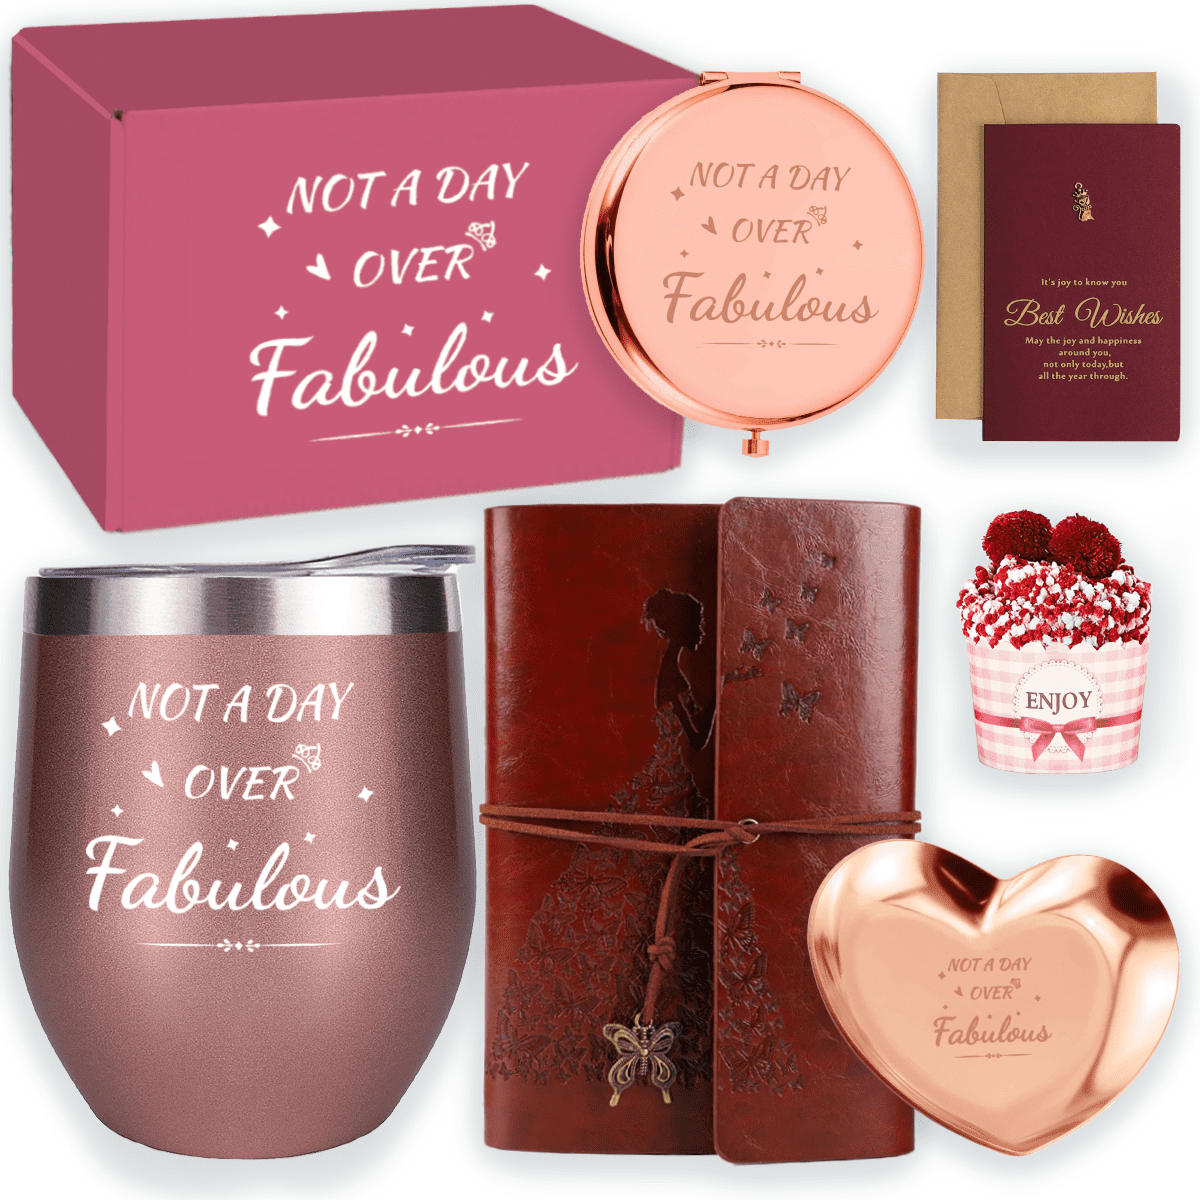  Christmas Gifts for Women – Unique Holiday Gift for Women, Her,  Mom, Wife, Girlfriend, Sister, Coworkers, Boss, Teacher, Nurse, Xmas  Tumbler Gifts Basket for Women Who Have Everything : Home 